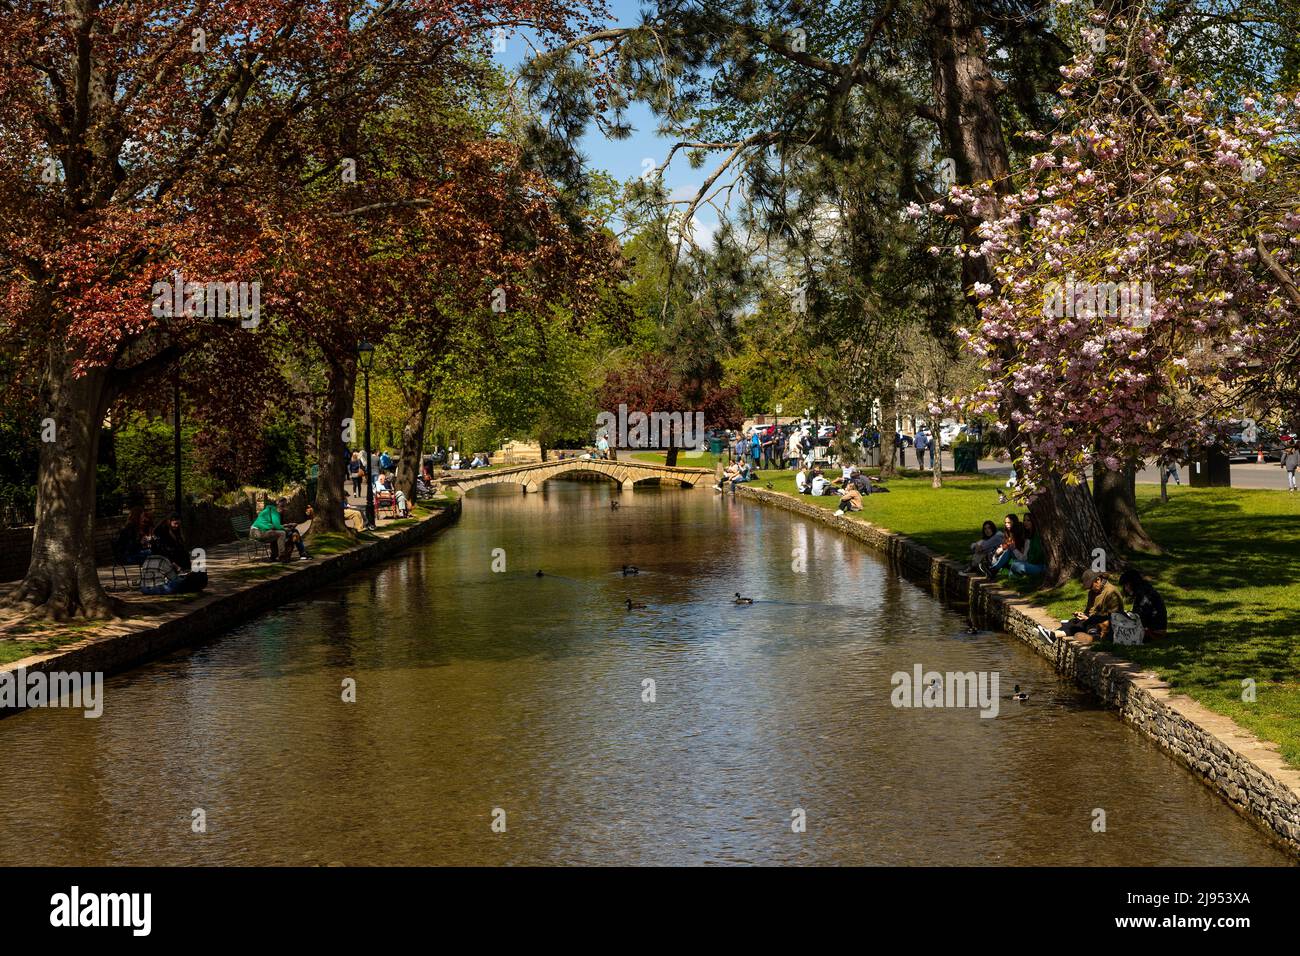 Tourists enjoy the scenic surroundings of the River Windrush in Bourton-on-the-Water, Cotswolds, Gloucestershire, Midlands, England, United Kingdom. Stock Photo